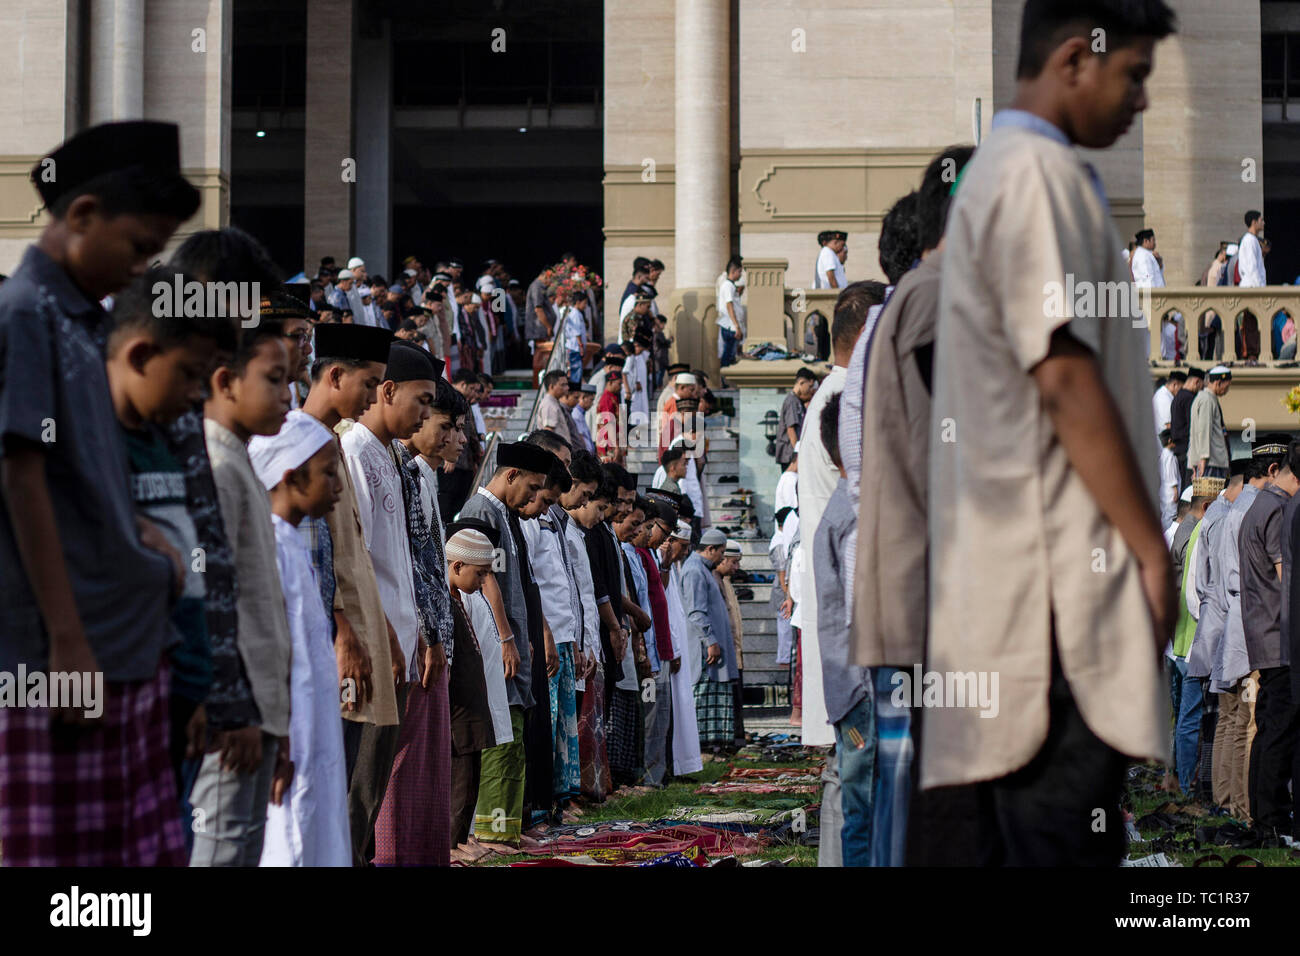 Acehnese Muslims perform Eid al-Fitr prayer in Lhokseumawe.  Muslims around the world celebrate Eid al-Fitr marked by the end of fasting in the holy month of Ramadan. Stock Photo